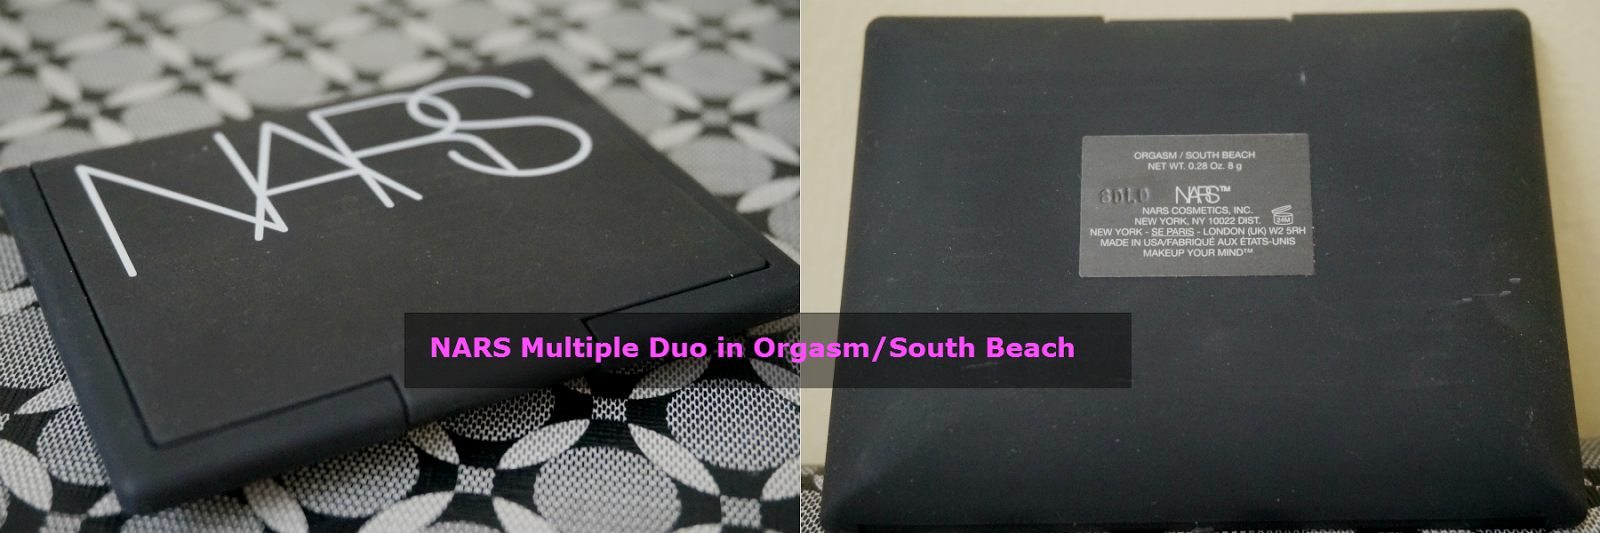 NARS Multiple Duo in Orgasm/South Beach